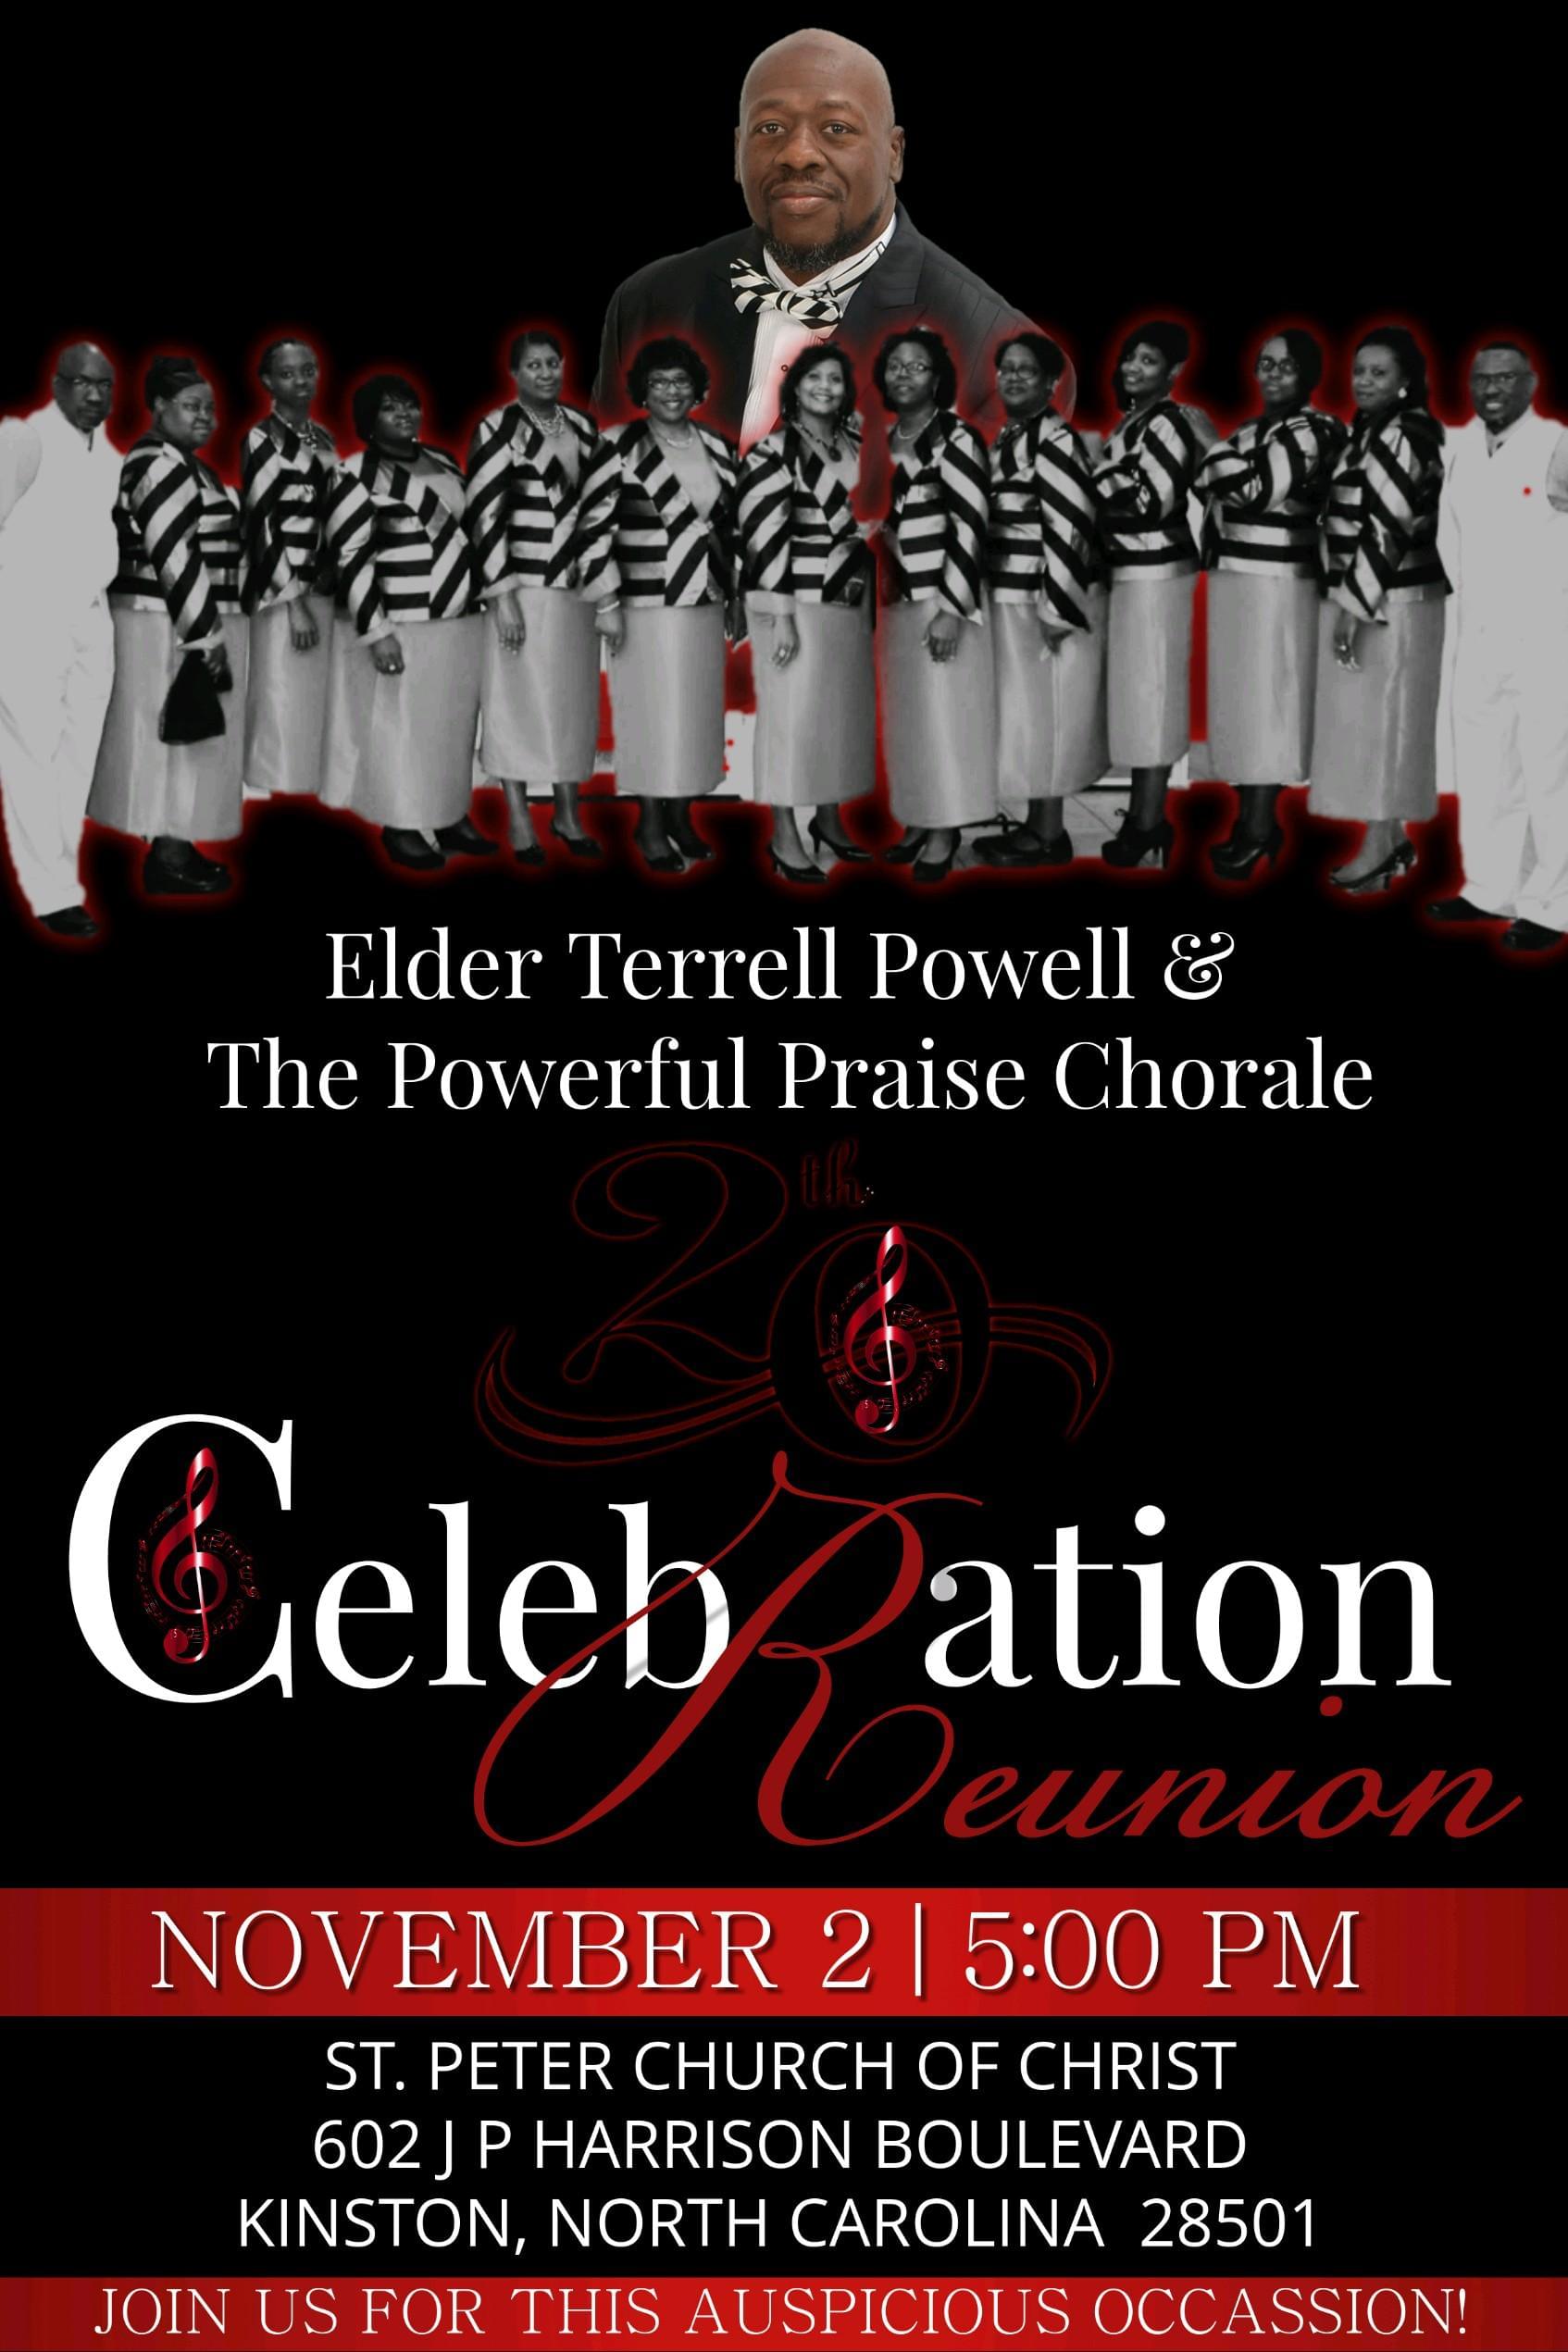 Elder Terrell Powell and the Powerful Praise  Chorale Celebration Reunion